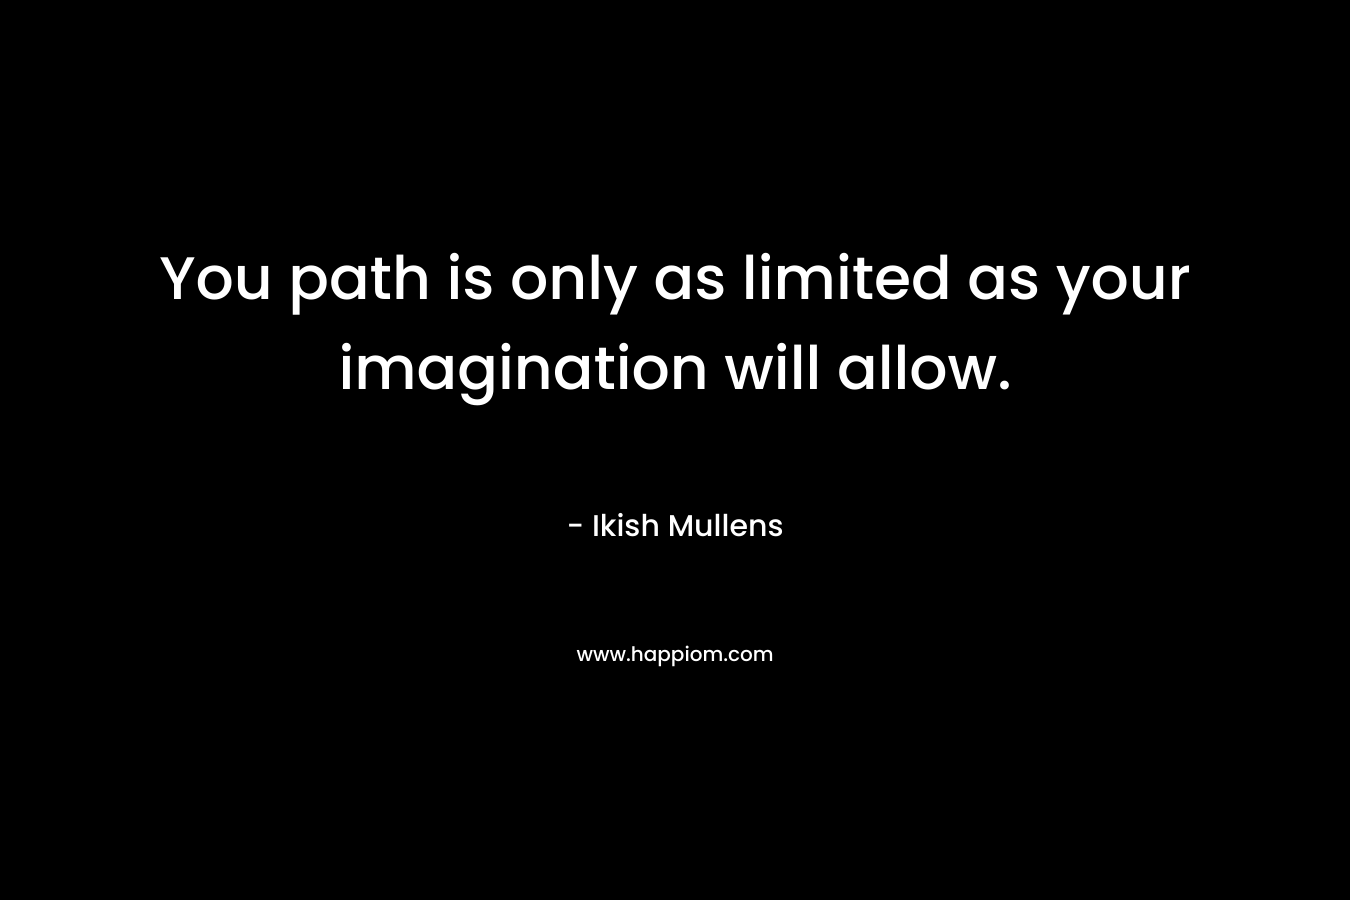 You path is only as limited as your imagination will allow. – Ikish Mullens